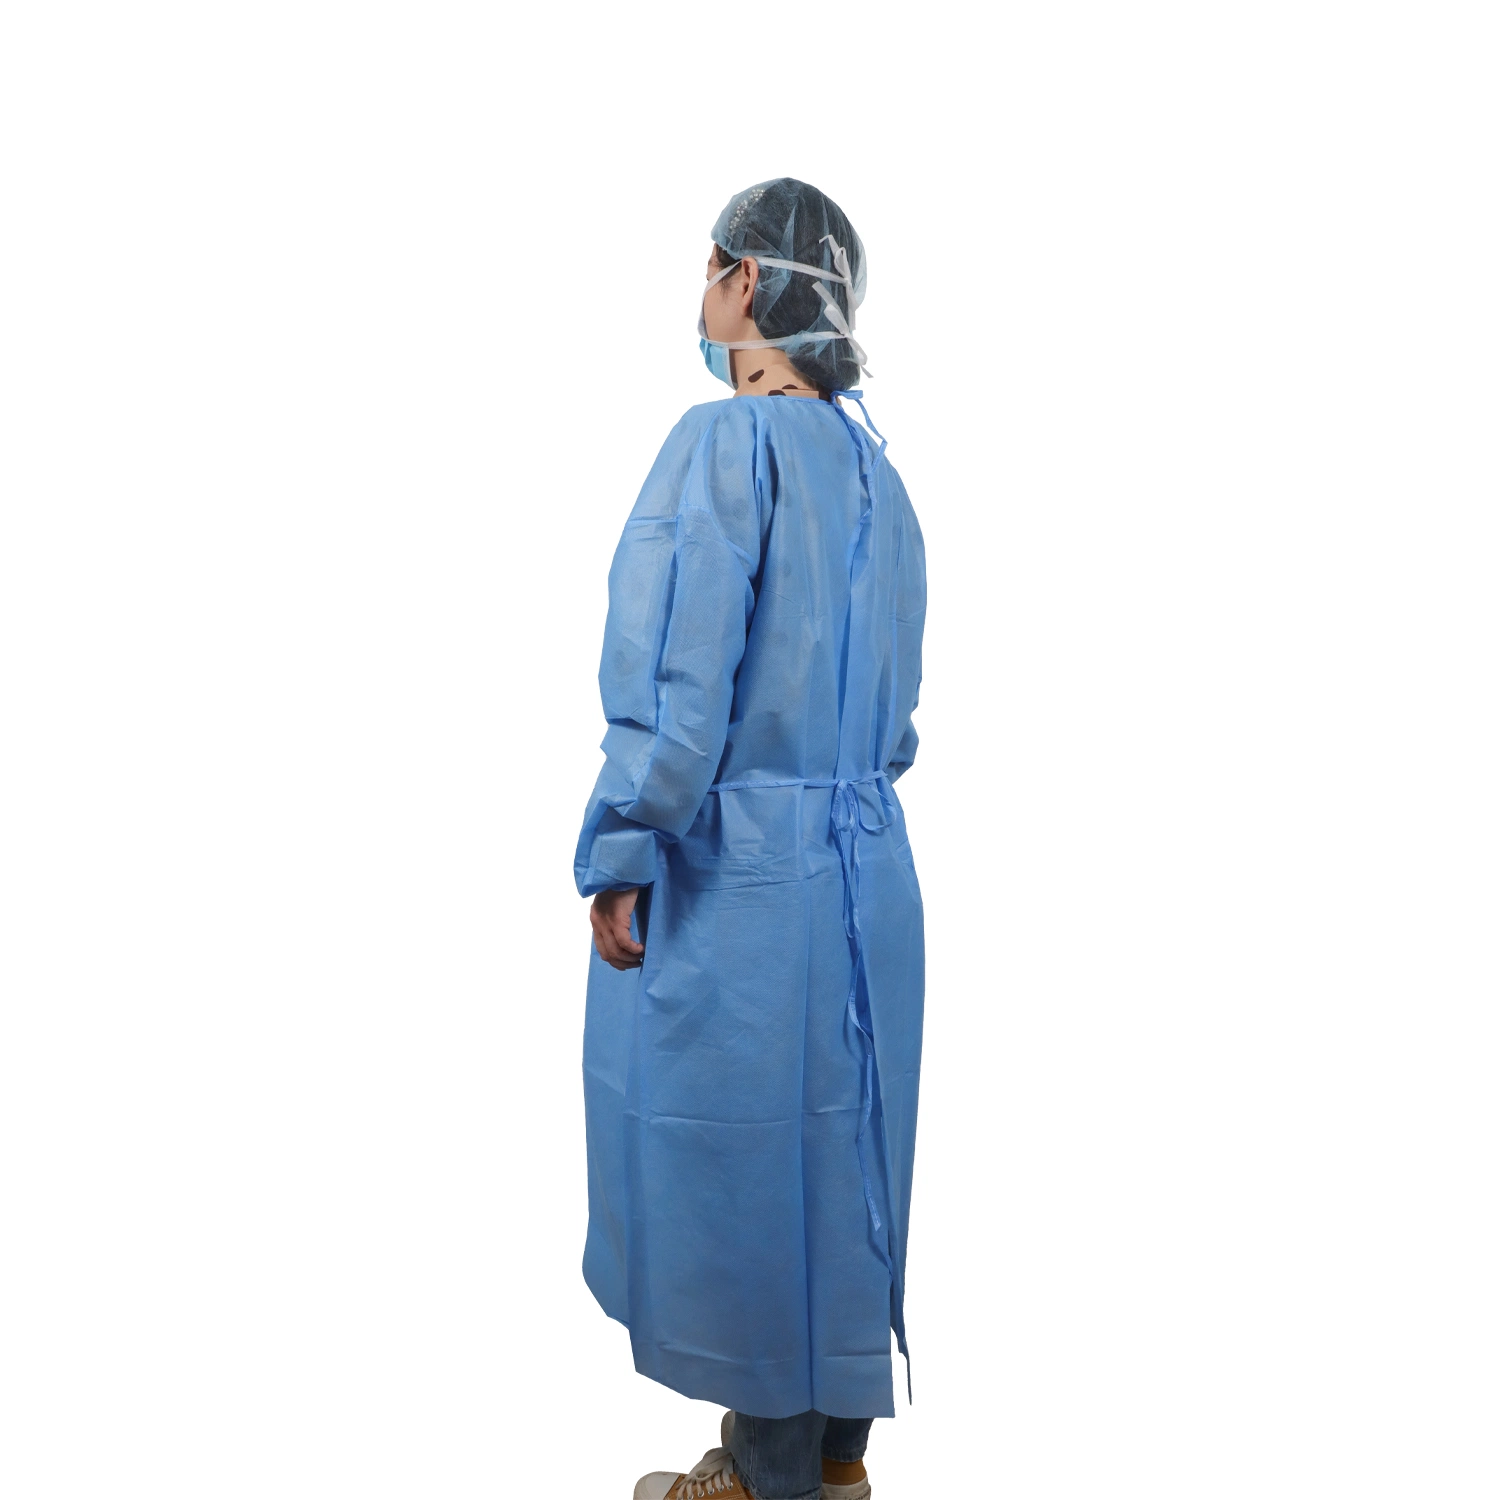 Blue SMS Surgicalgown Isolation Gown Knit Cuff